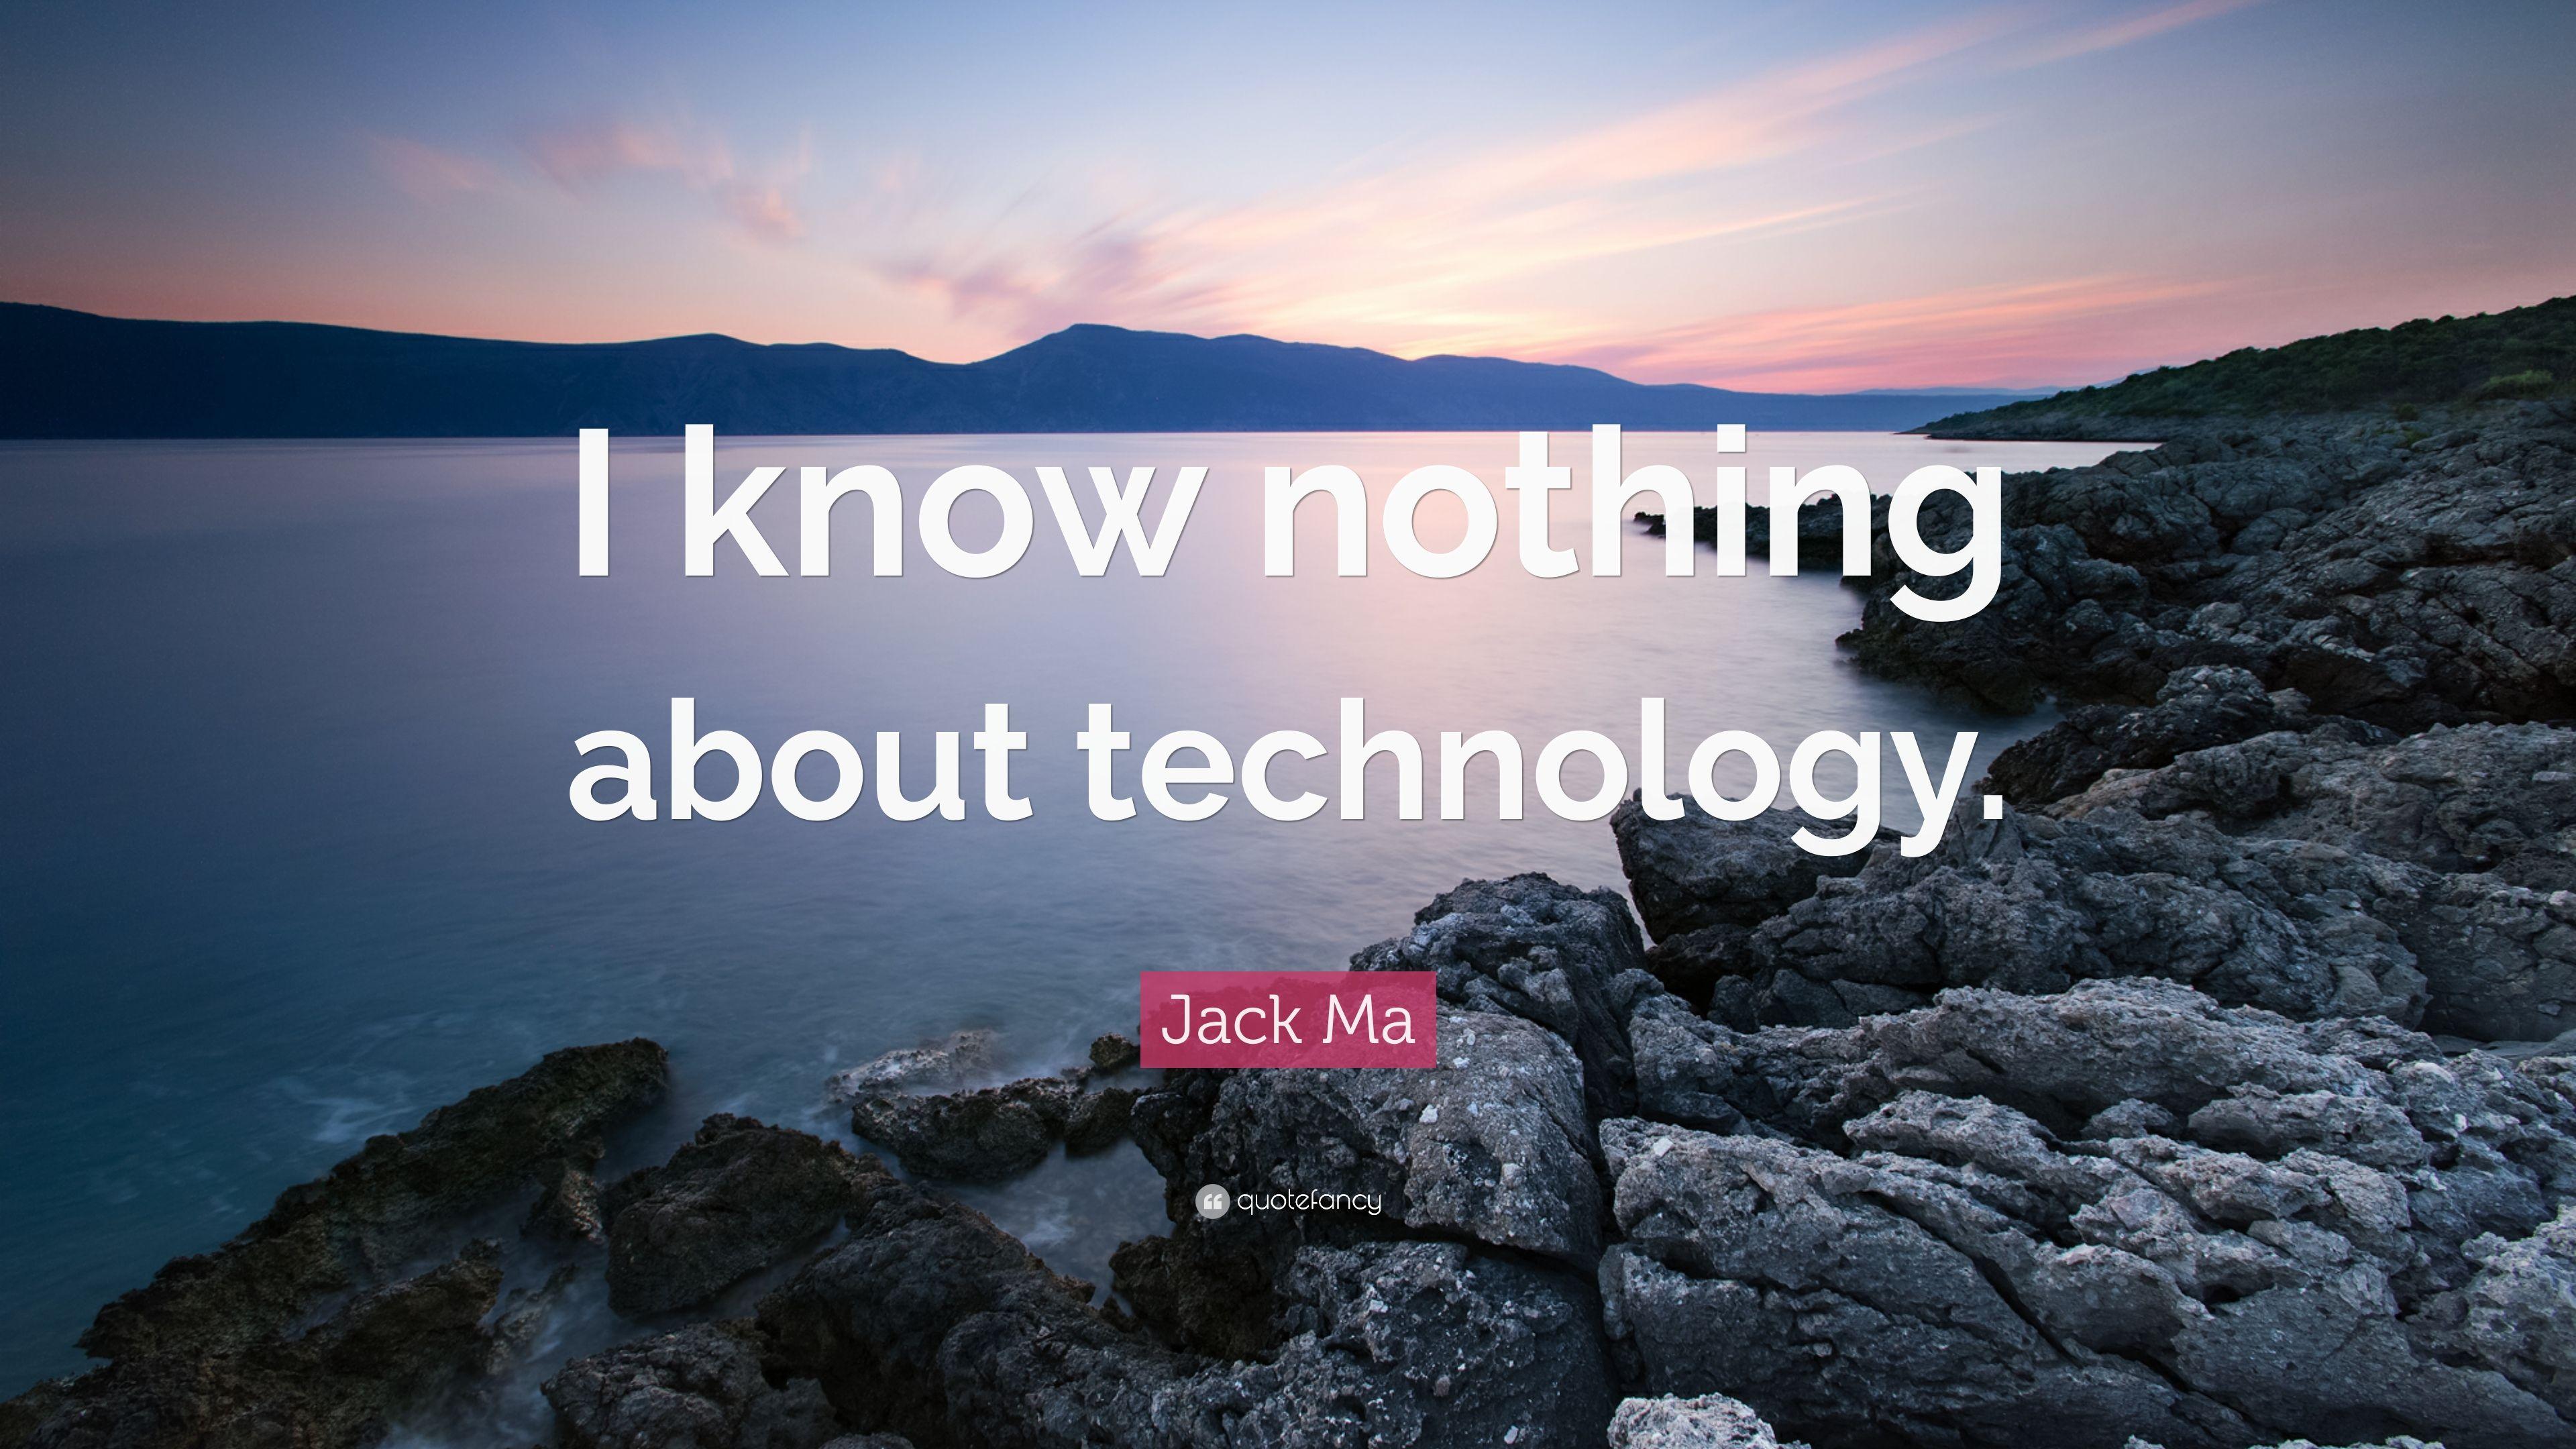 Jack Ma Quote: “I know nothing about technology.” 10 wallpaper